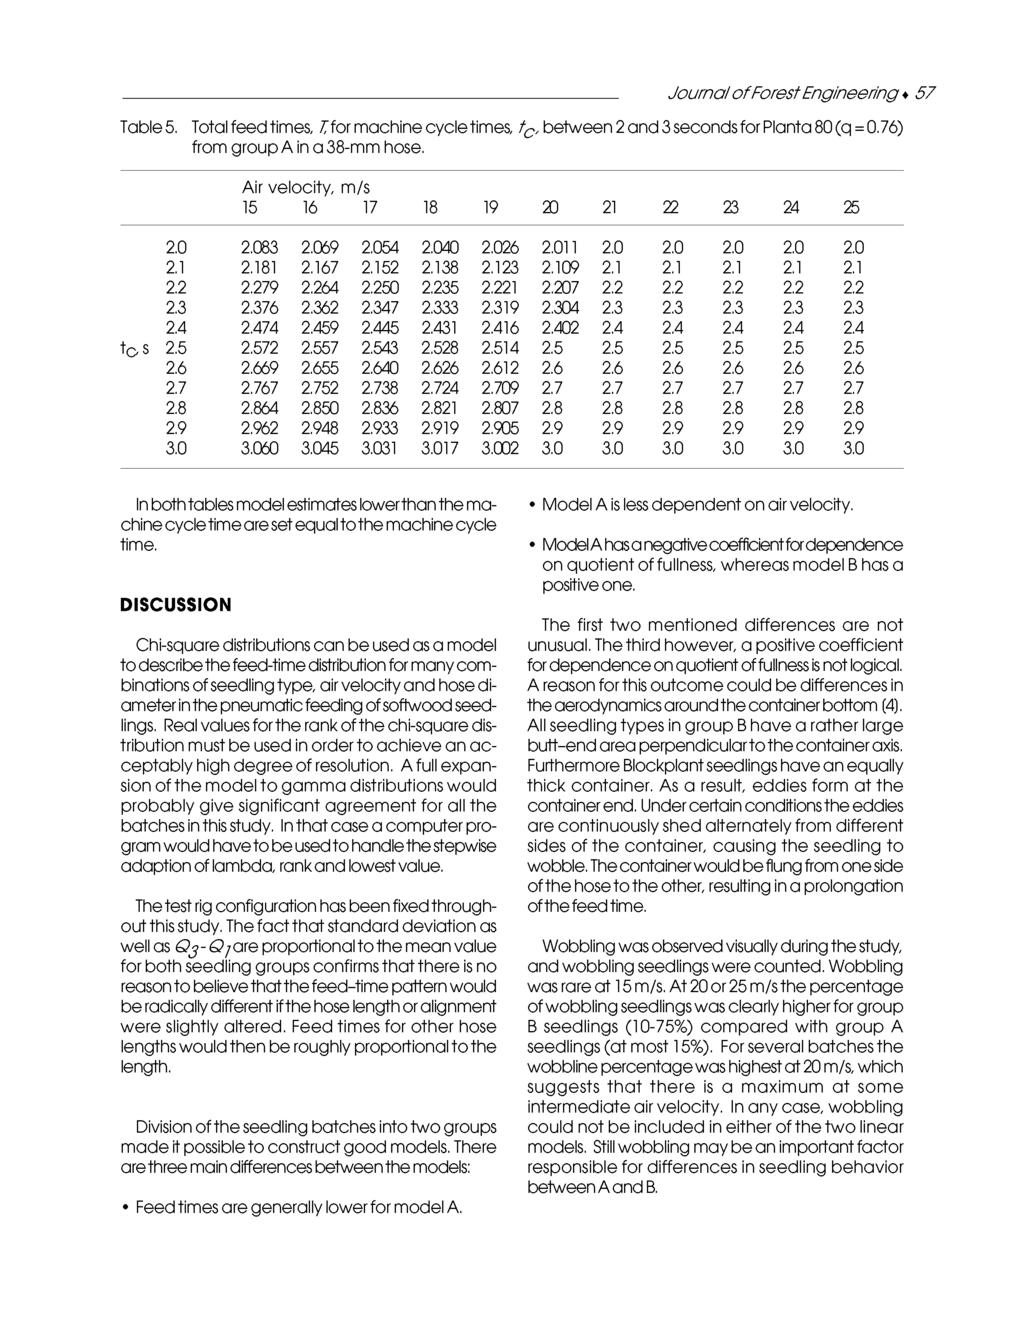 Journal of Forest Engineering 57 Table 5. Total feed times, T, for mahine yle times, t, between 2 and 3 seonds for Planta 80 (q = ) from group A in a mm hose.